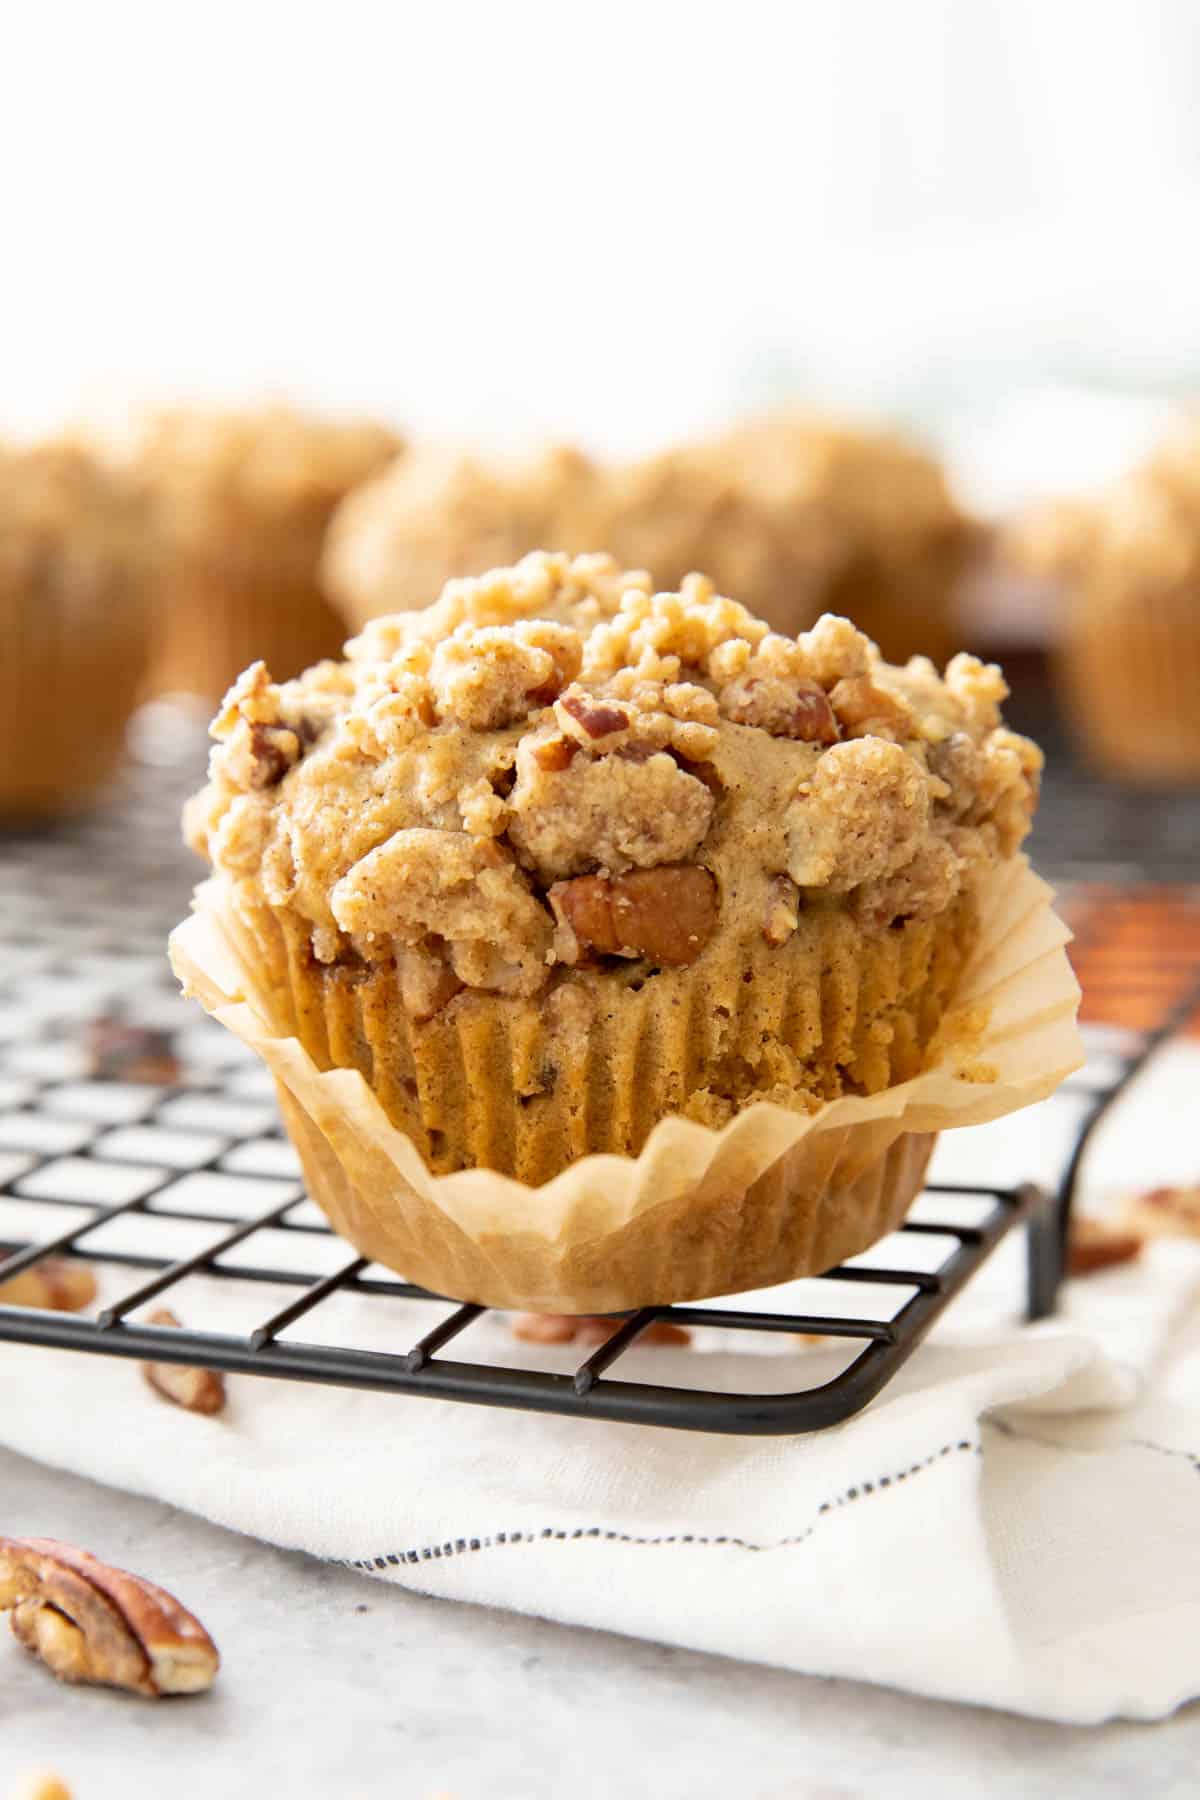 Closeup photo of cinnamon streusel muffin with the muffin liner peeled off